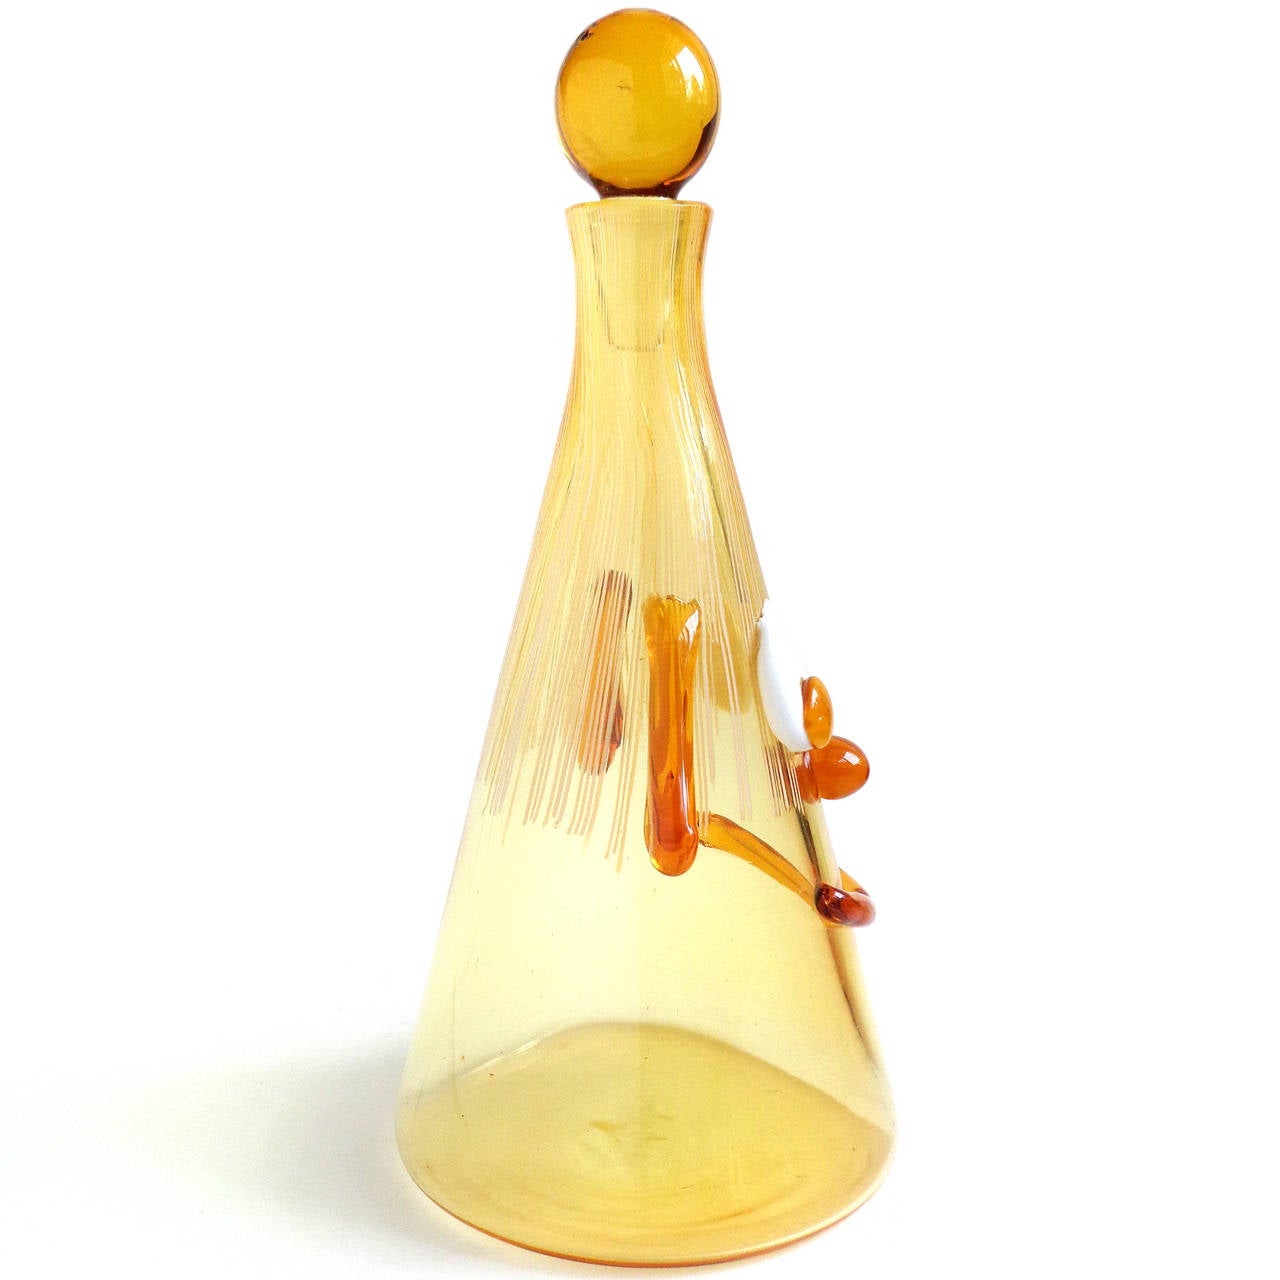 Cute and unusual Murano handblown golden yellow, with applied orange and white Italian art glass clown face decanter. Documented to the Fratelli Toso Company. The piece has droopy ears, wide eyes, a big smile and threads of white glass for the hair.